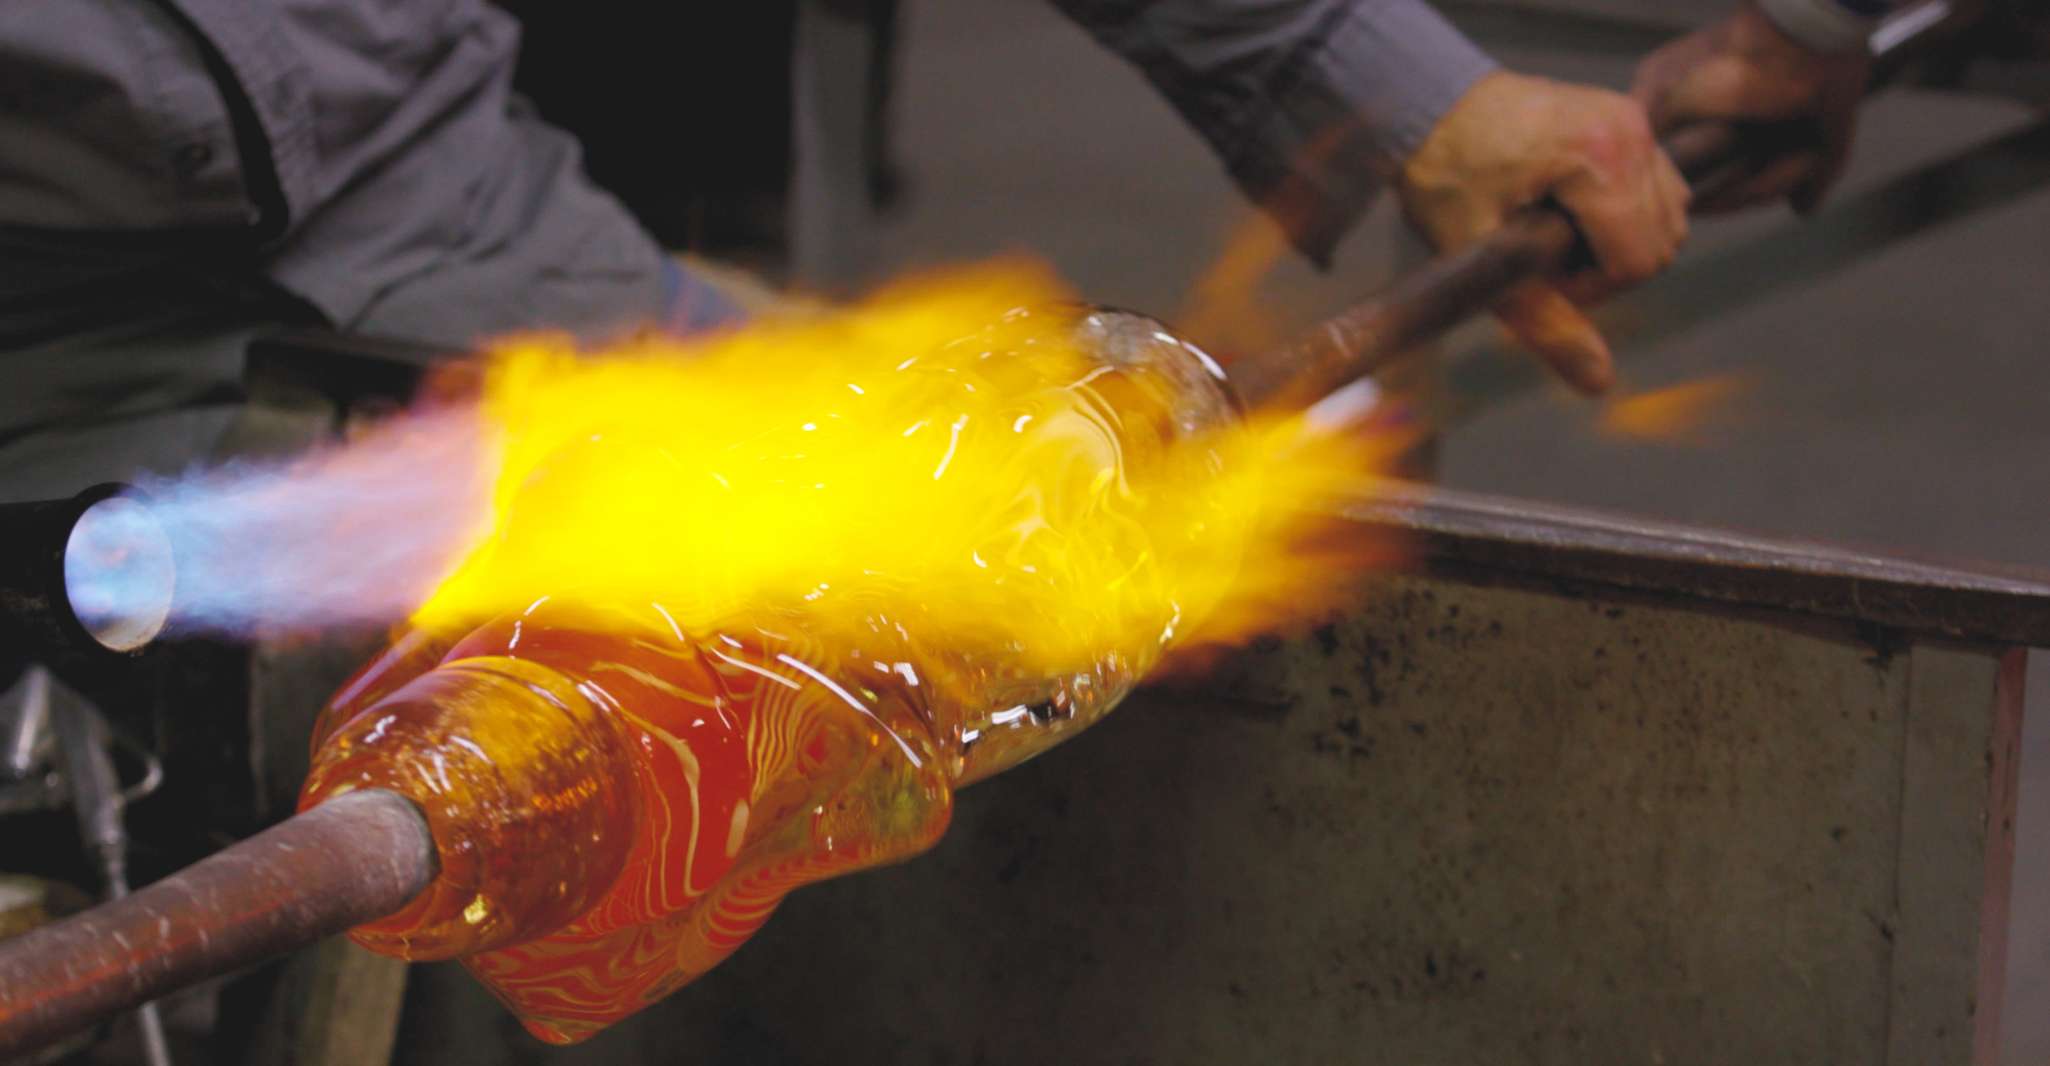 Murano, Glass Blowing Experience at Gino Mazzuccato Factory - Housity